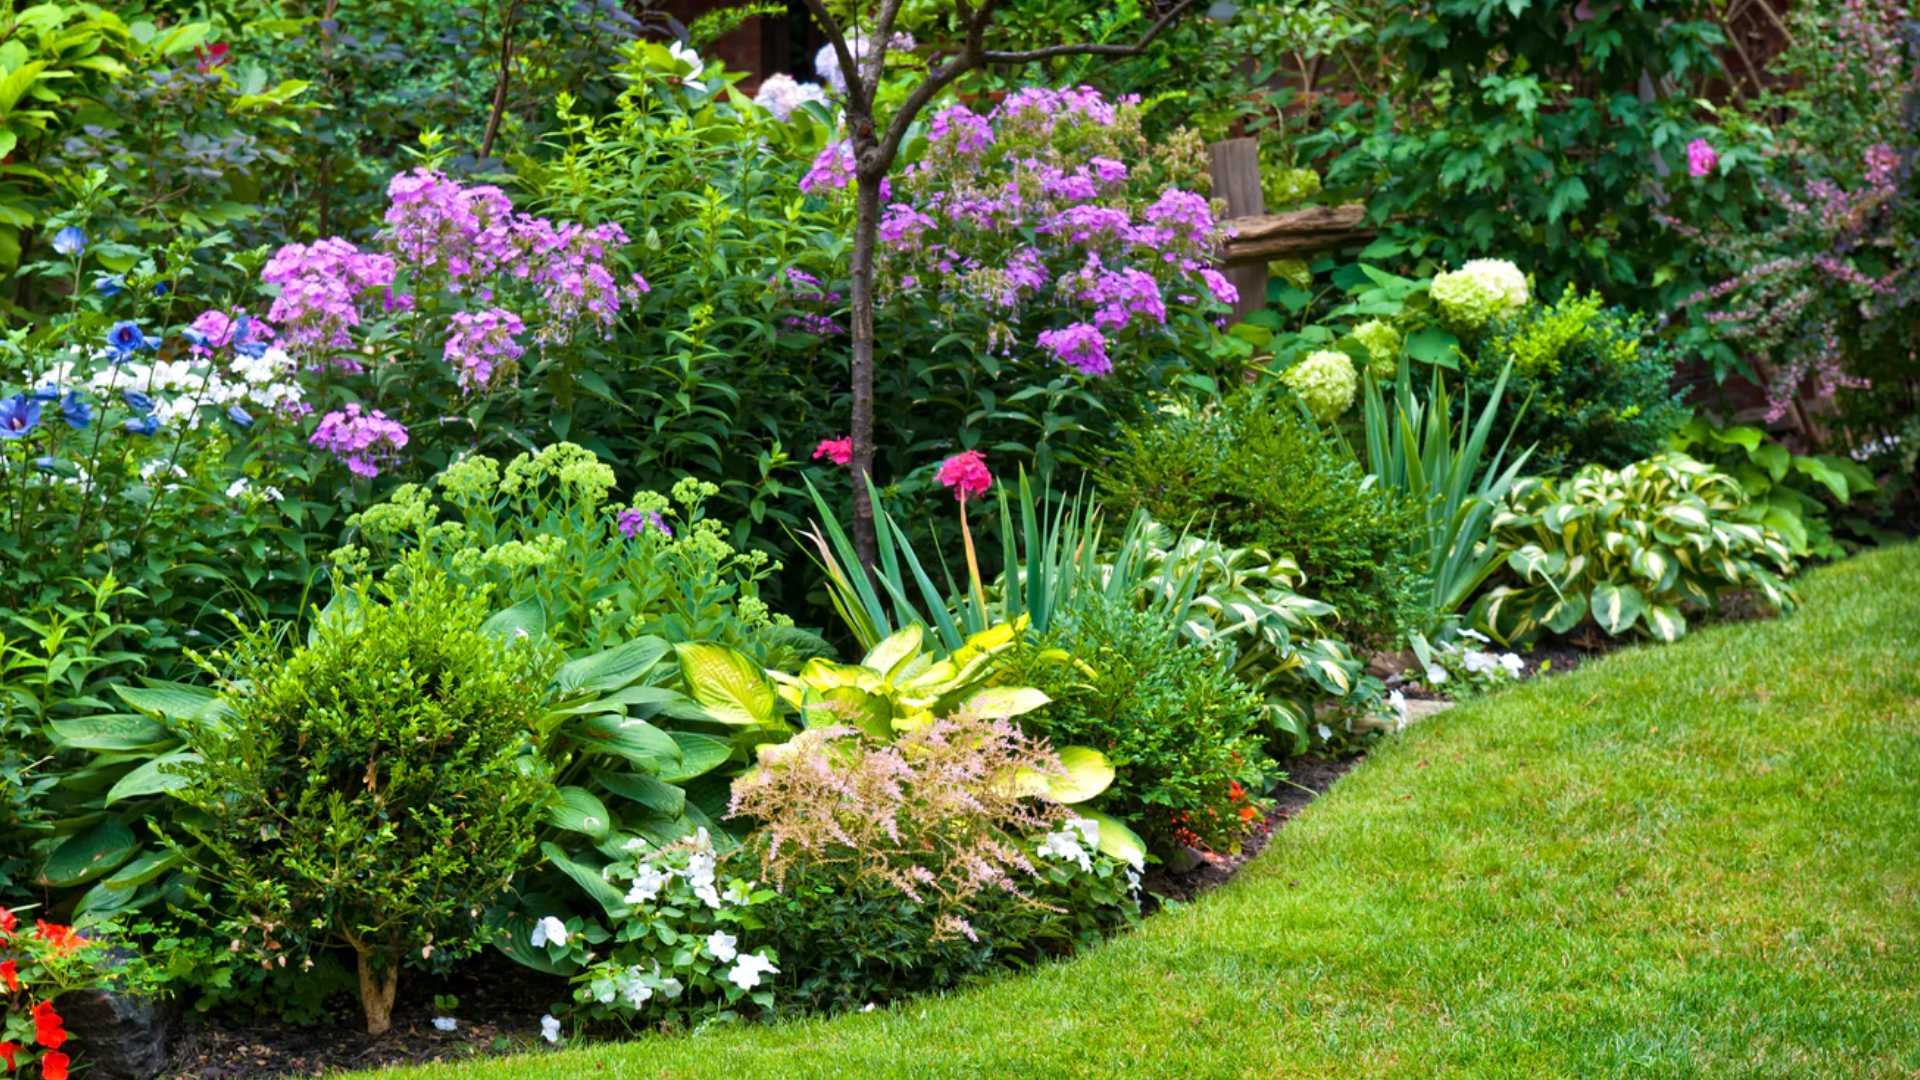 Frankie Flowers' must-do's to prep your garden for spring